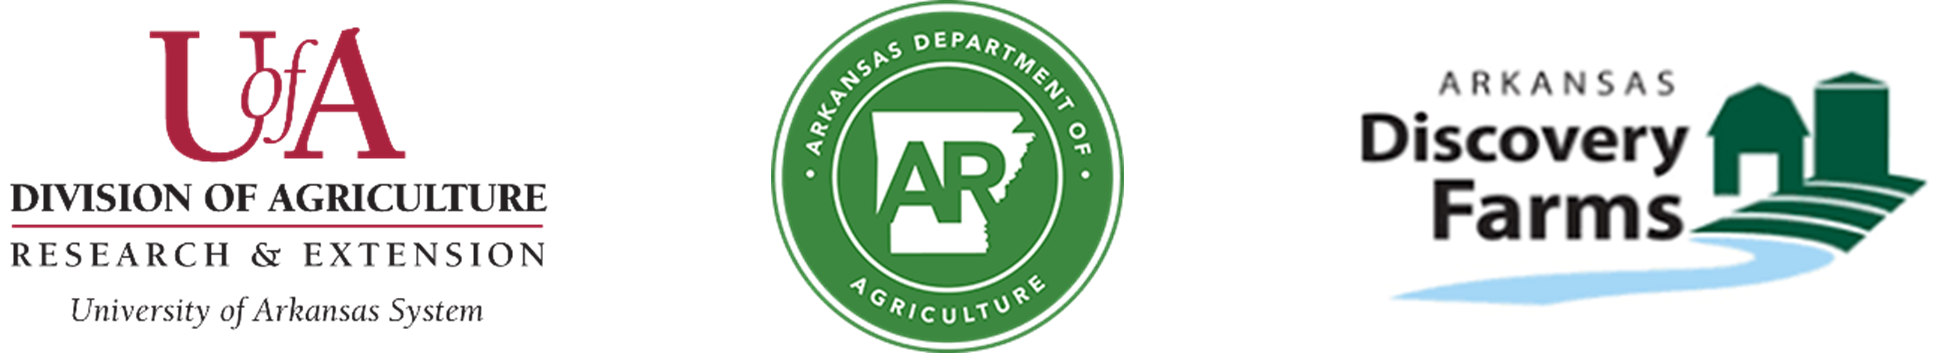 Logos for the University of Arkansas System Division of Agriculture, Arkansas Department of Agriculture and Arkansas Discovery Farms program